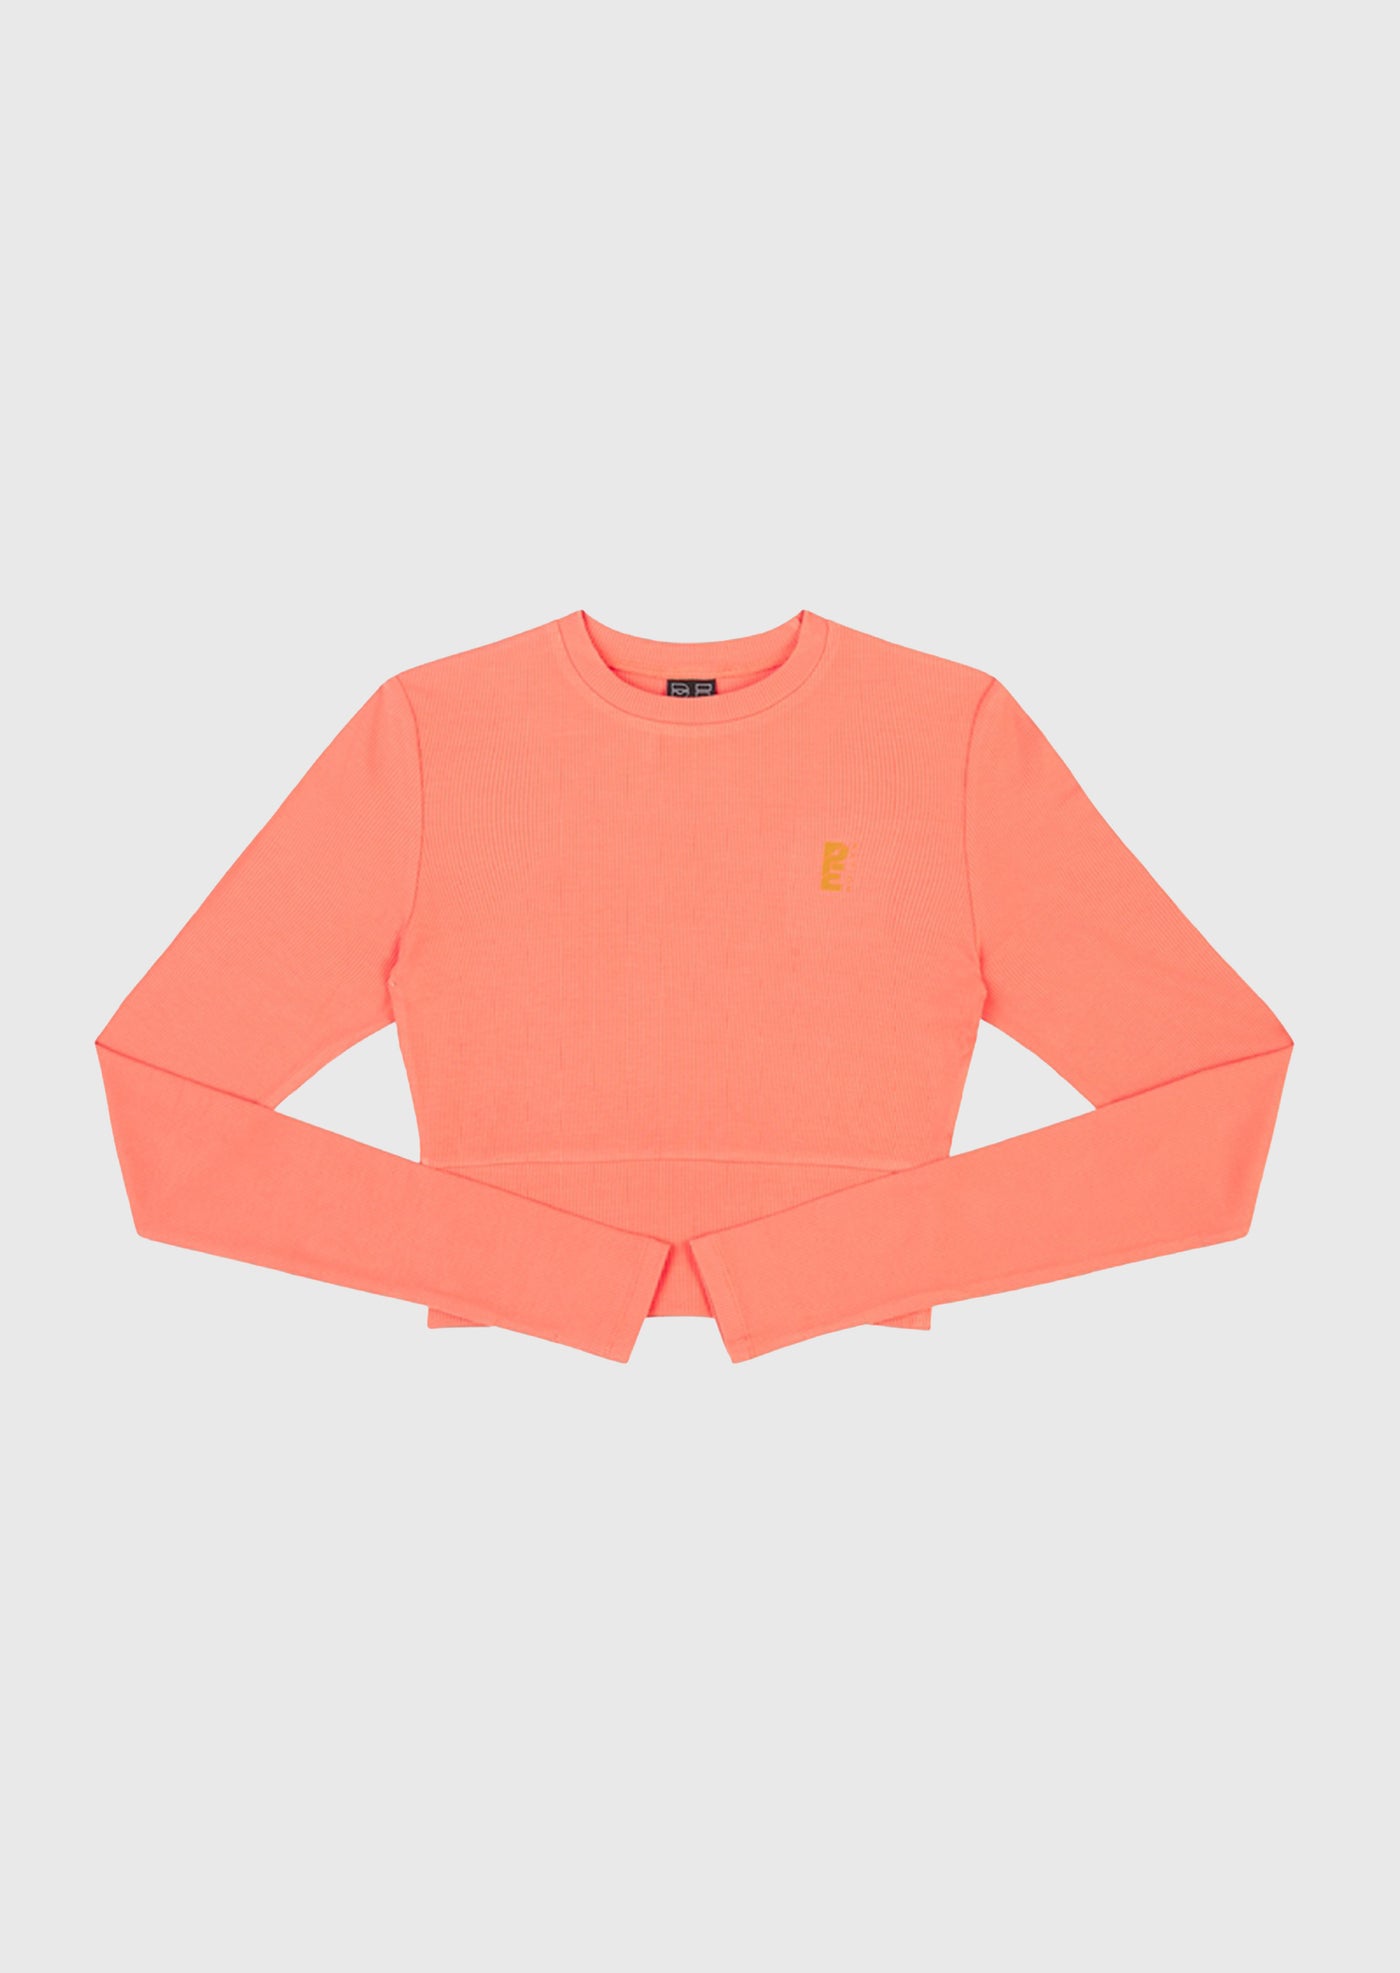 FREE PLAY LS TOP IN PERSIMMON